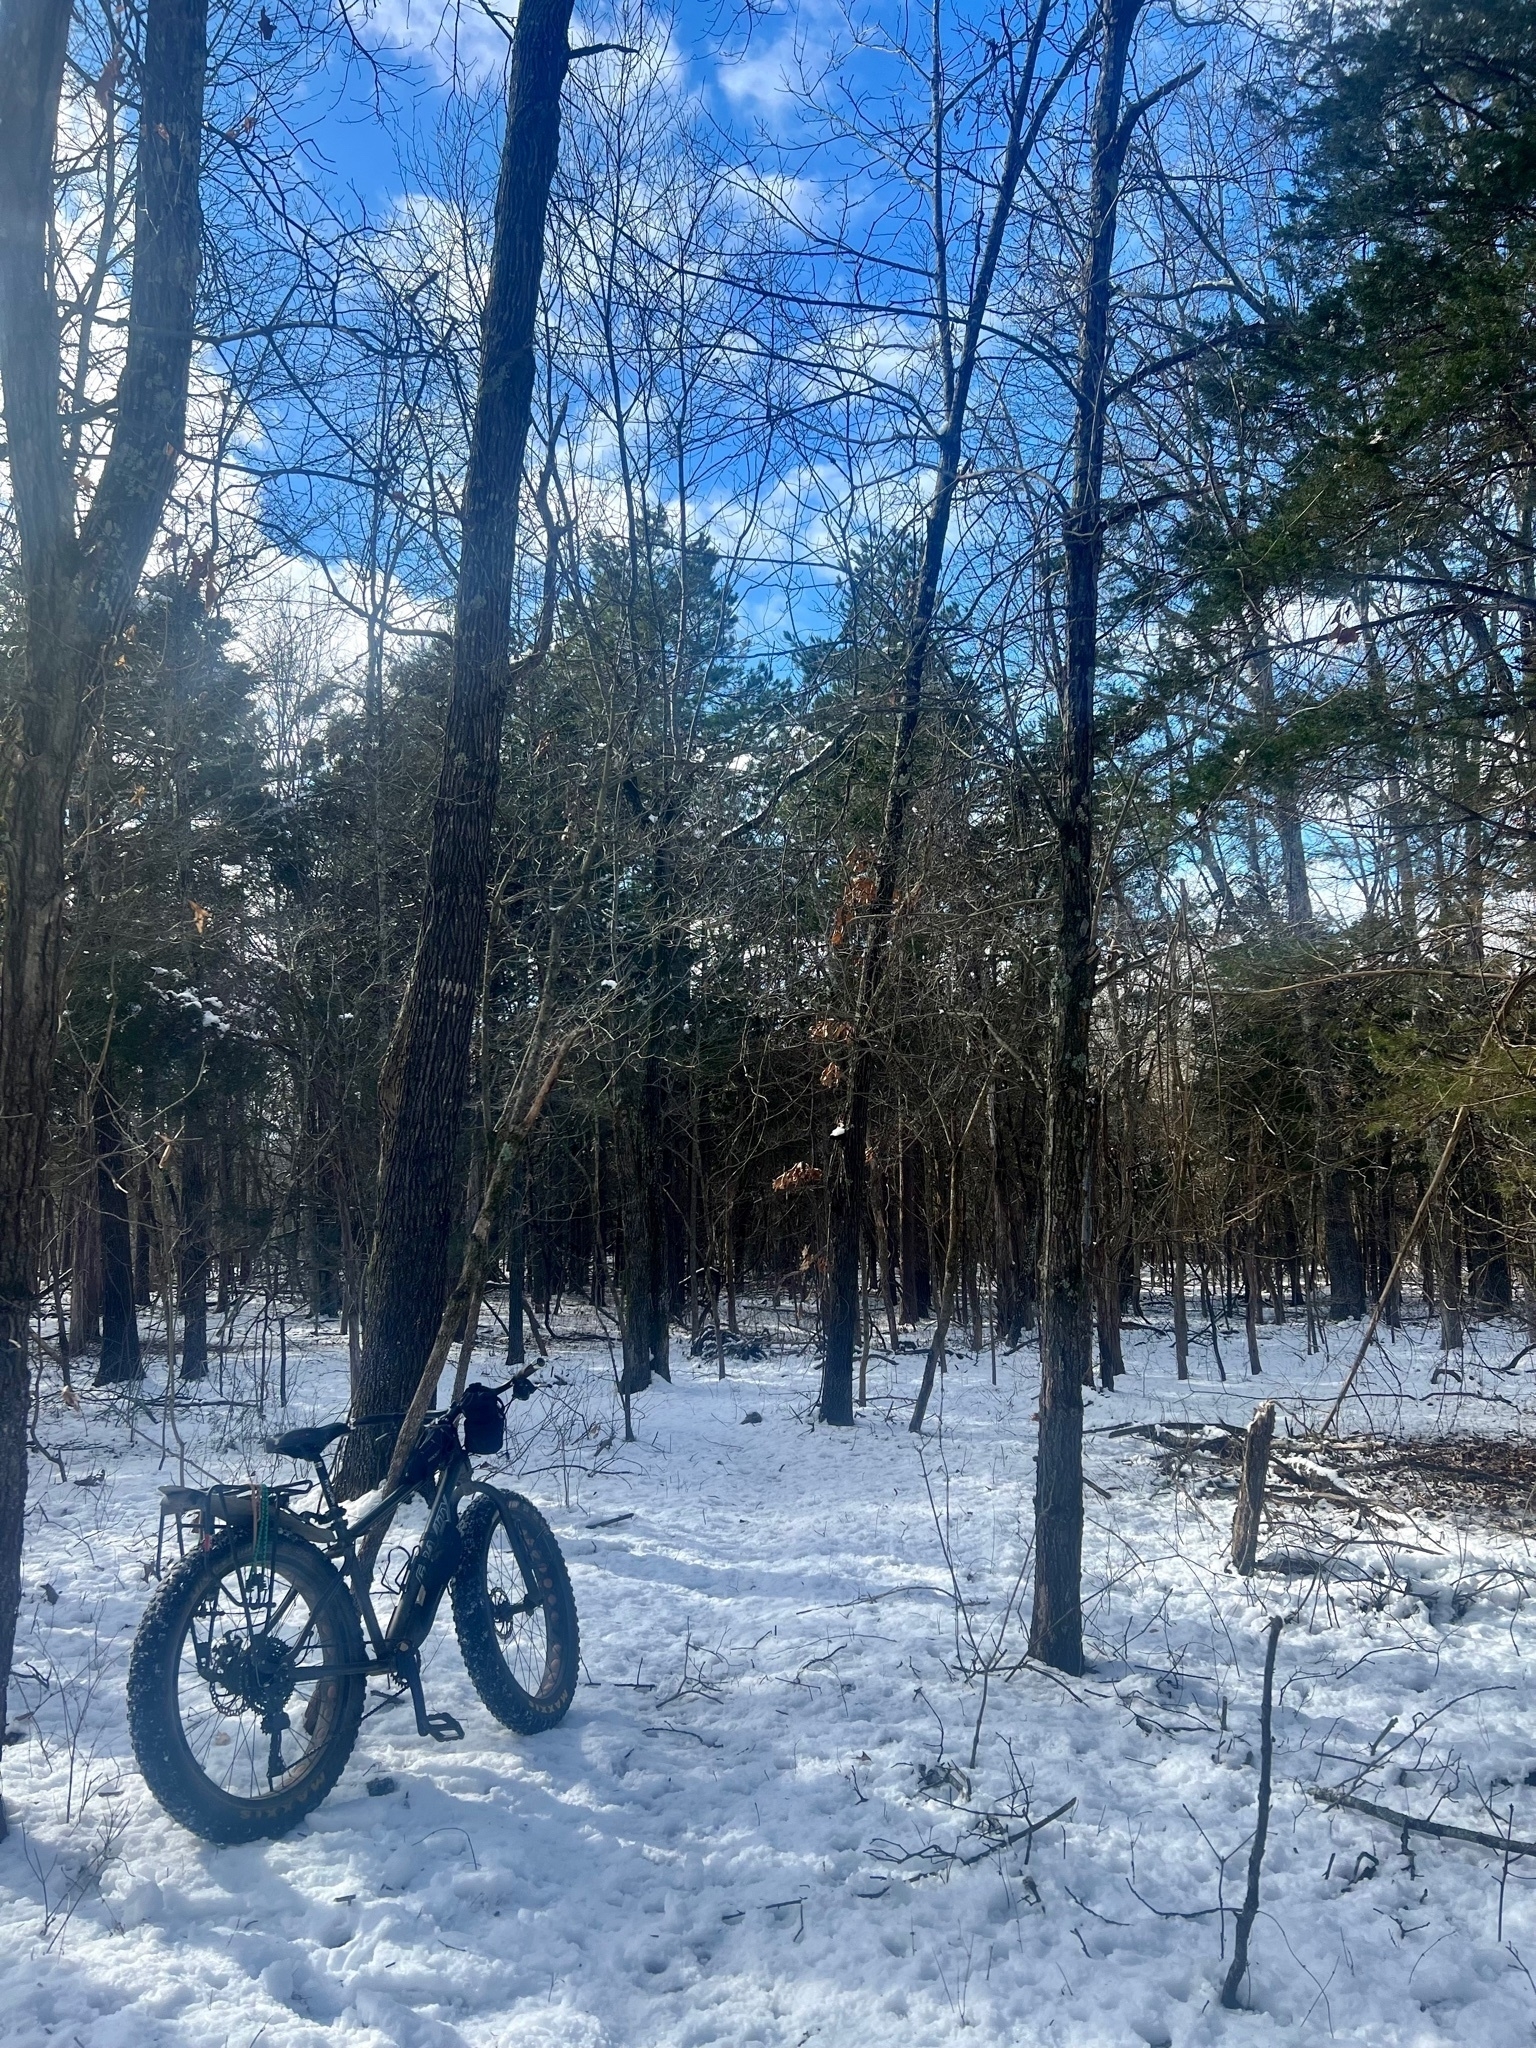 A fat tire bike leans against a tree next to a snowy trail in the woods